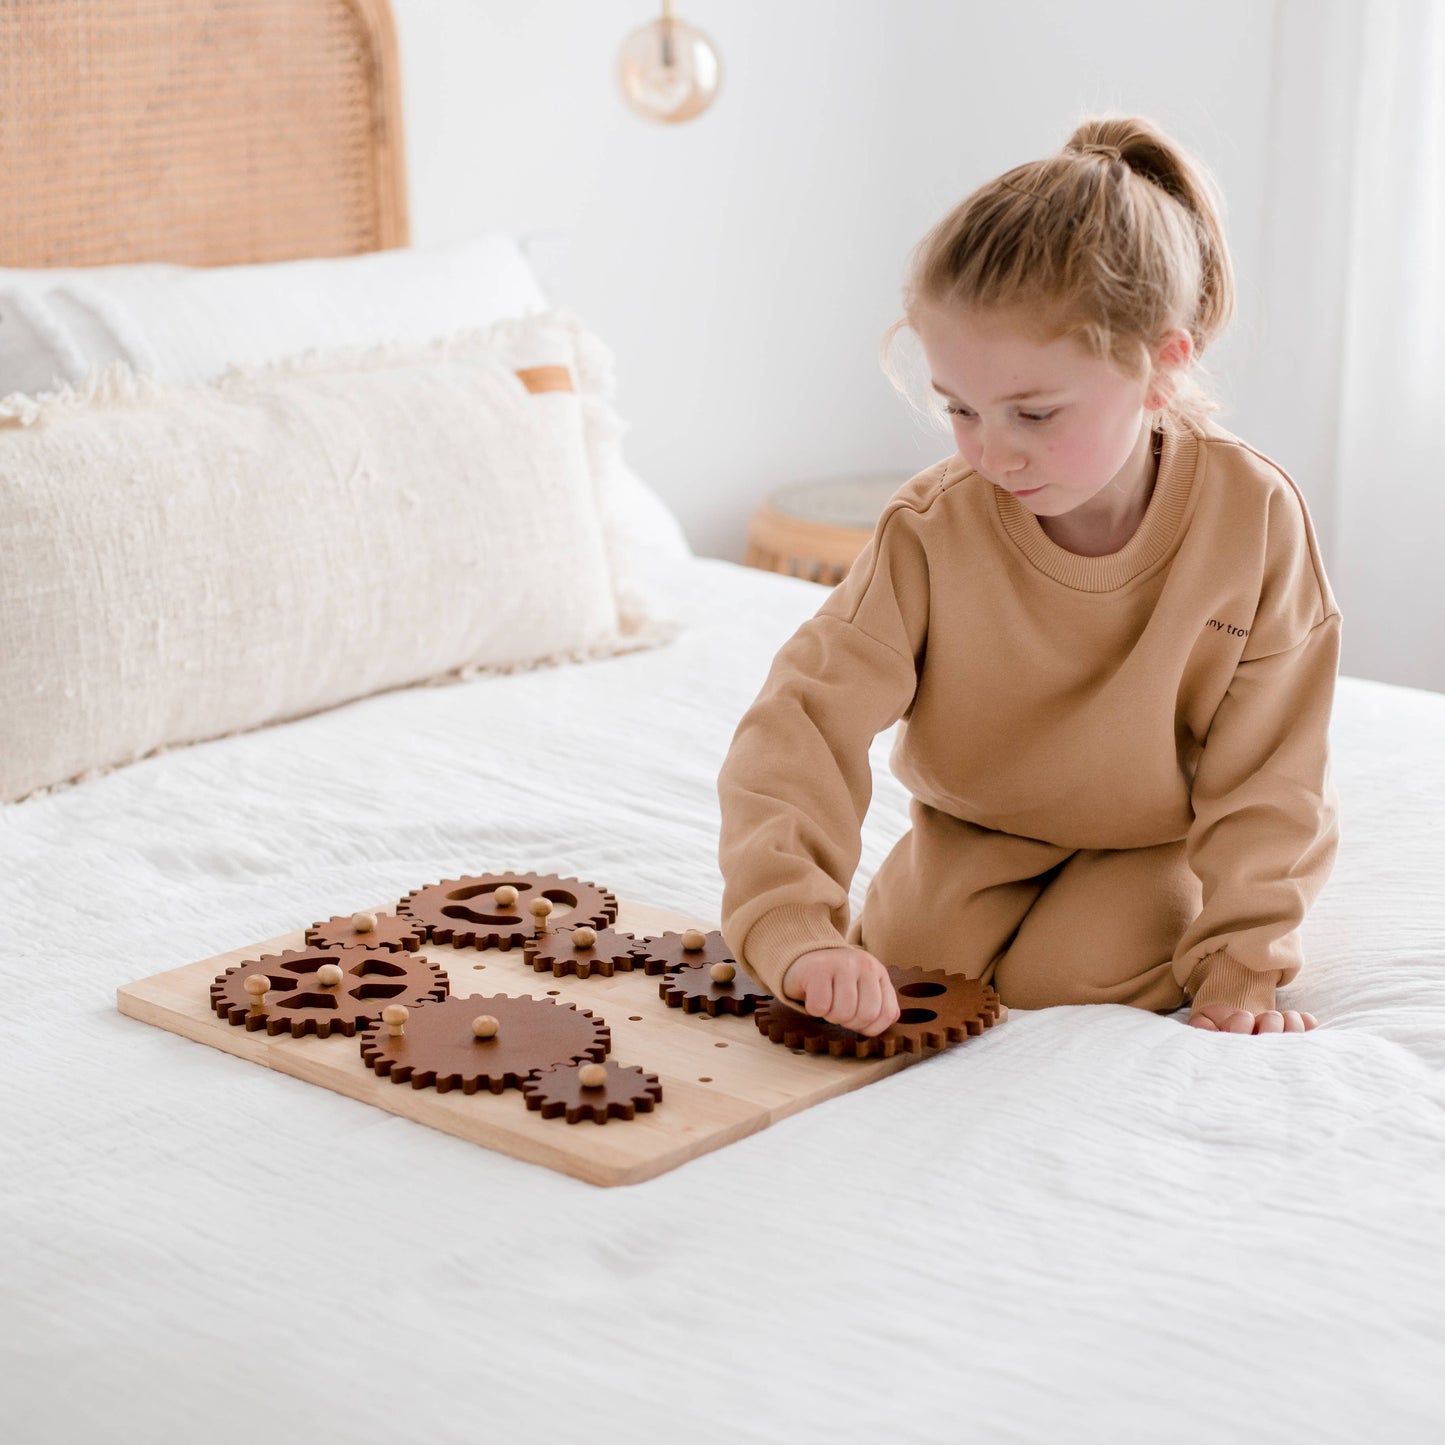 Child playing on bed with wooden gear construction set